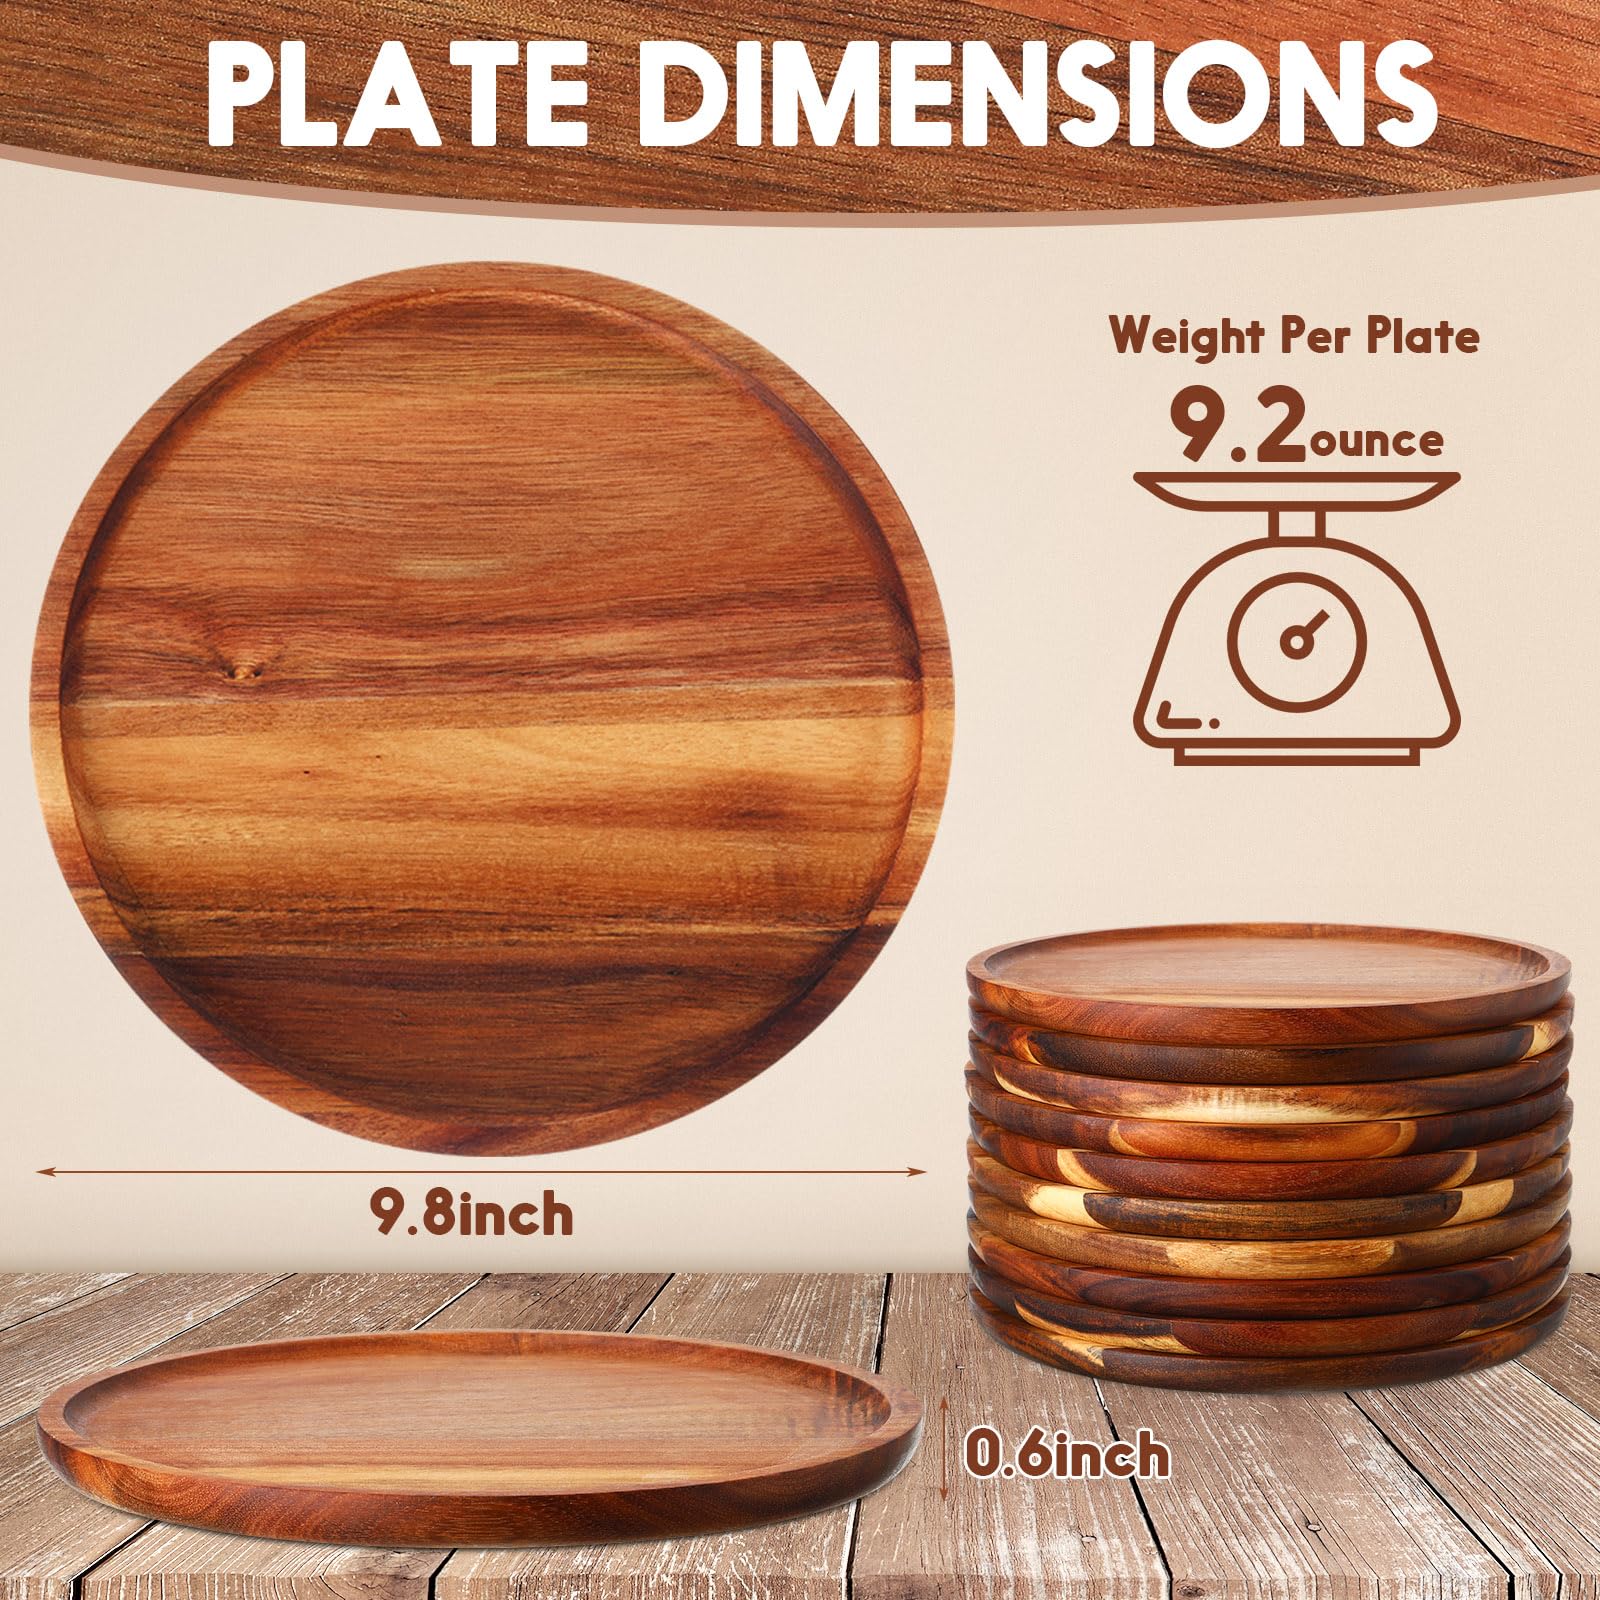 Rtteri 12 Pieces Acacia Wood Dinner Plates 9.8 Inch Round Wood Dishes Wooden Charger Serving Tray Easy Cleaning Lightweight Unbreakable Classic Plate for Dishes Snack, Dessert, Housewarming Gift